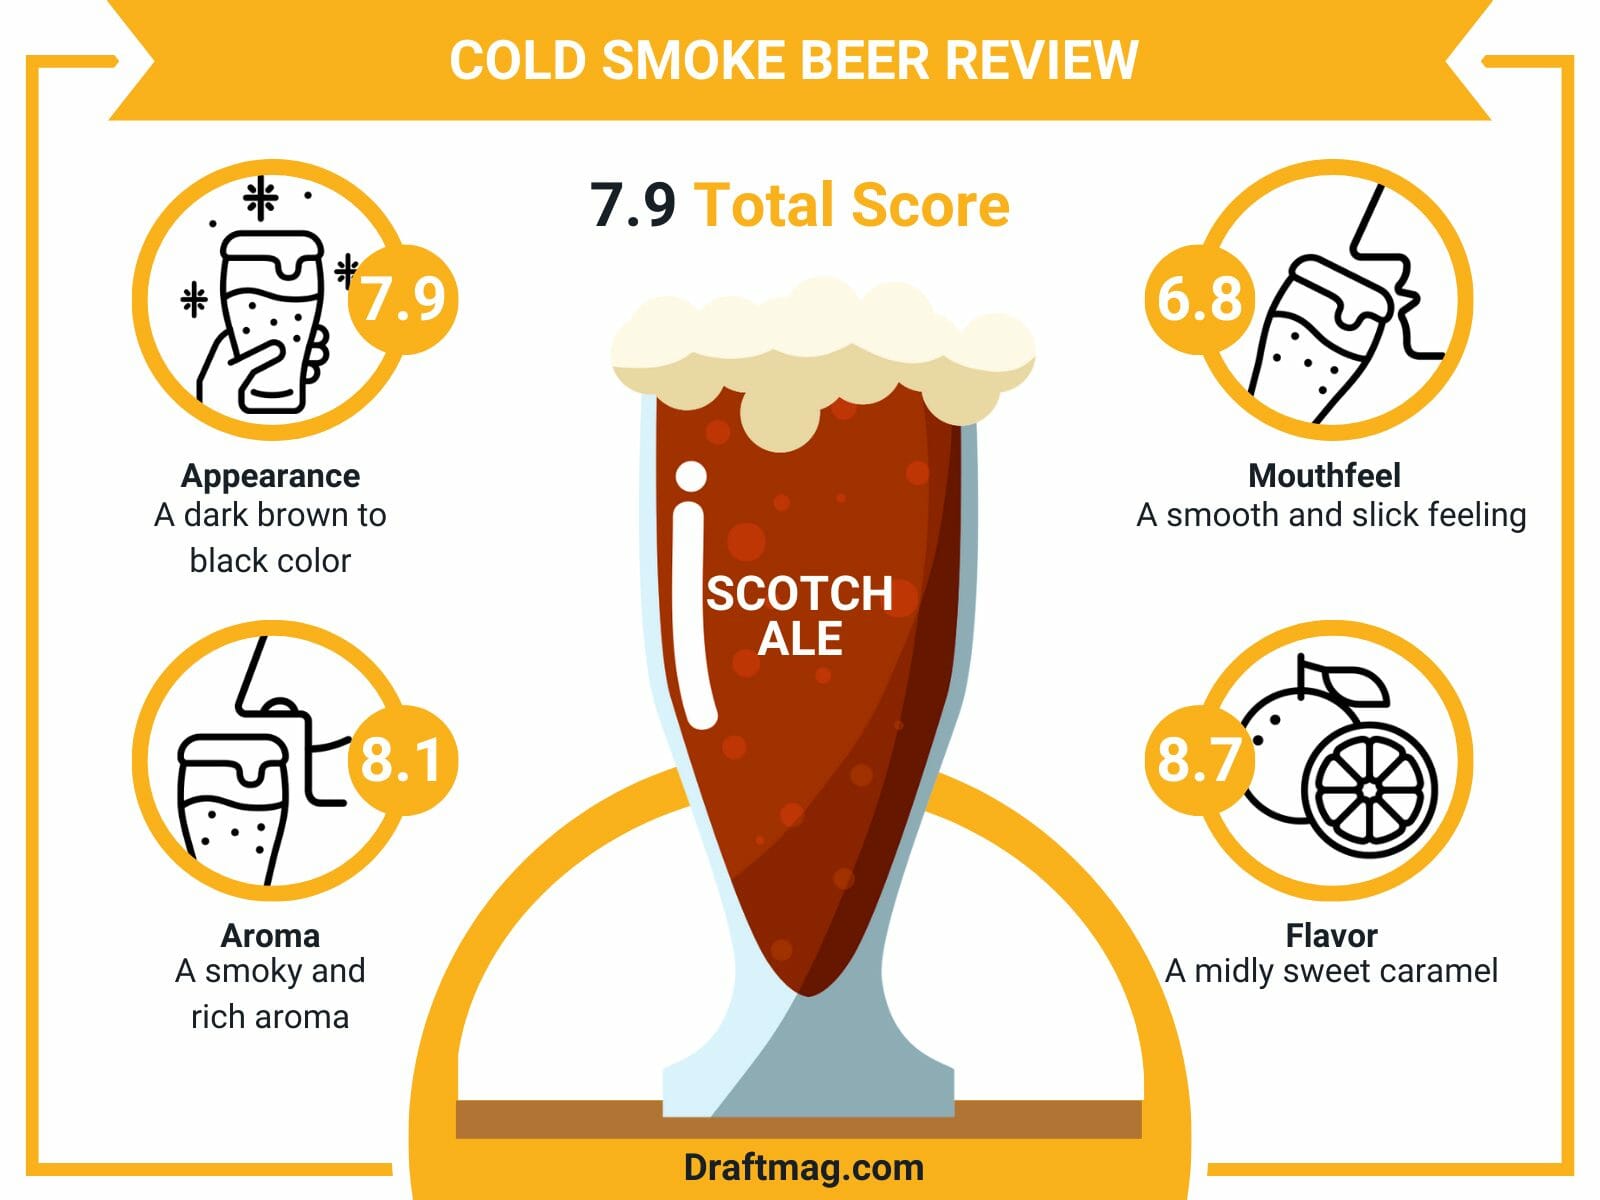 Cold smoke beer review infographic